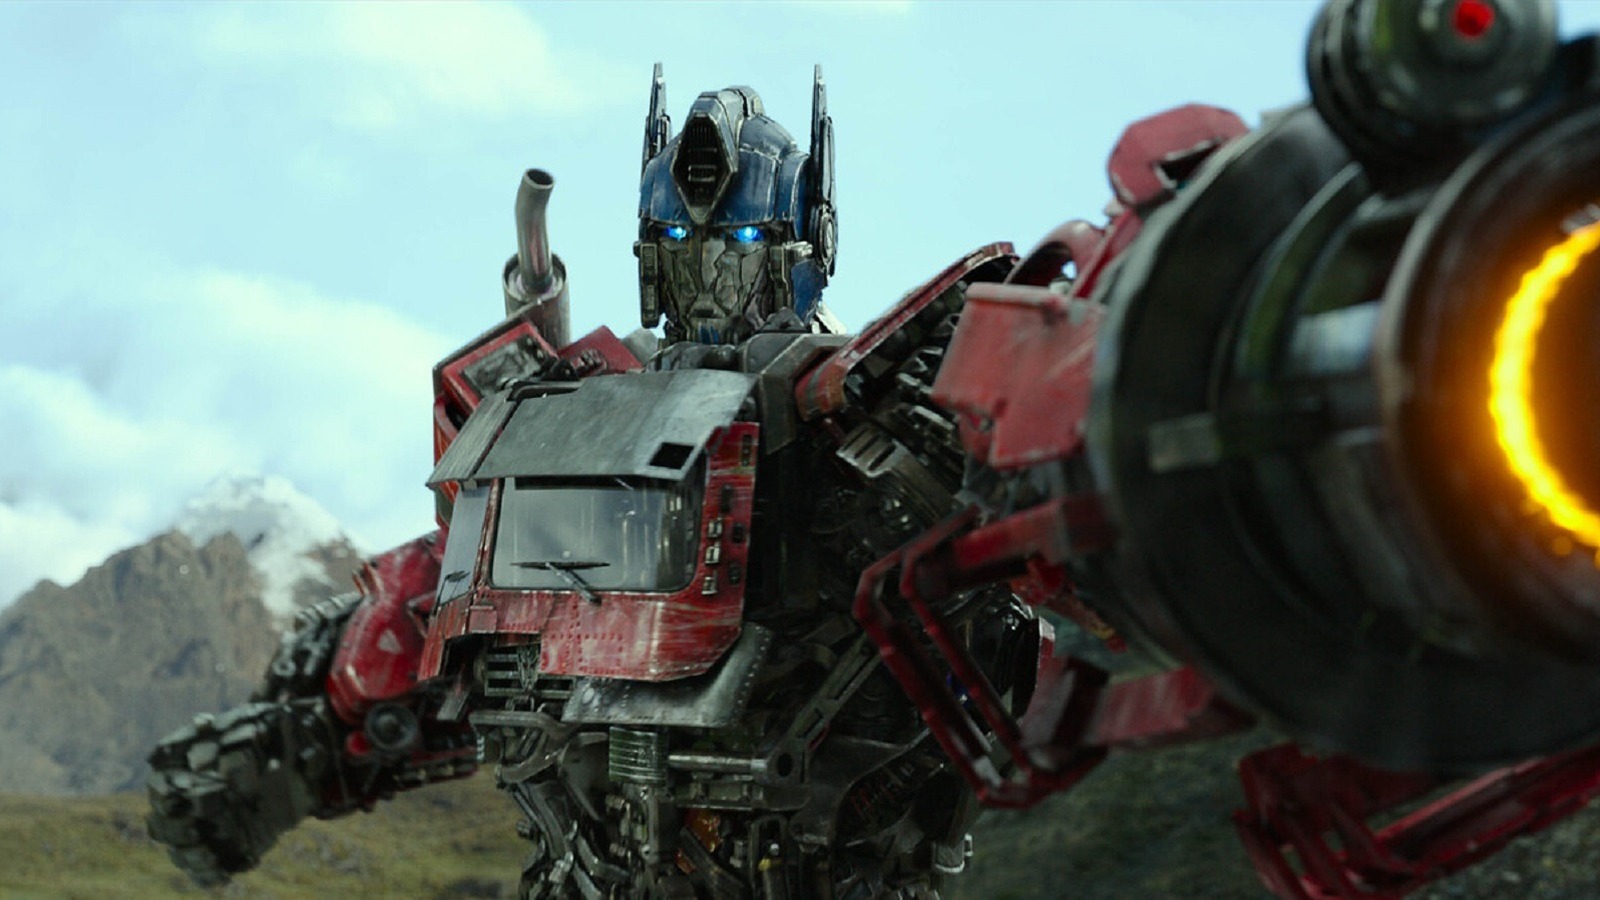 Transformers Comparison: How to Choose the Best One for You